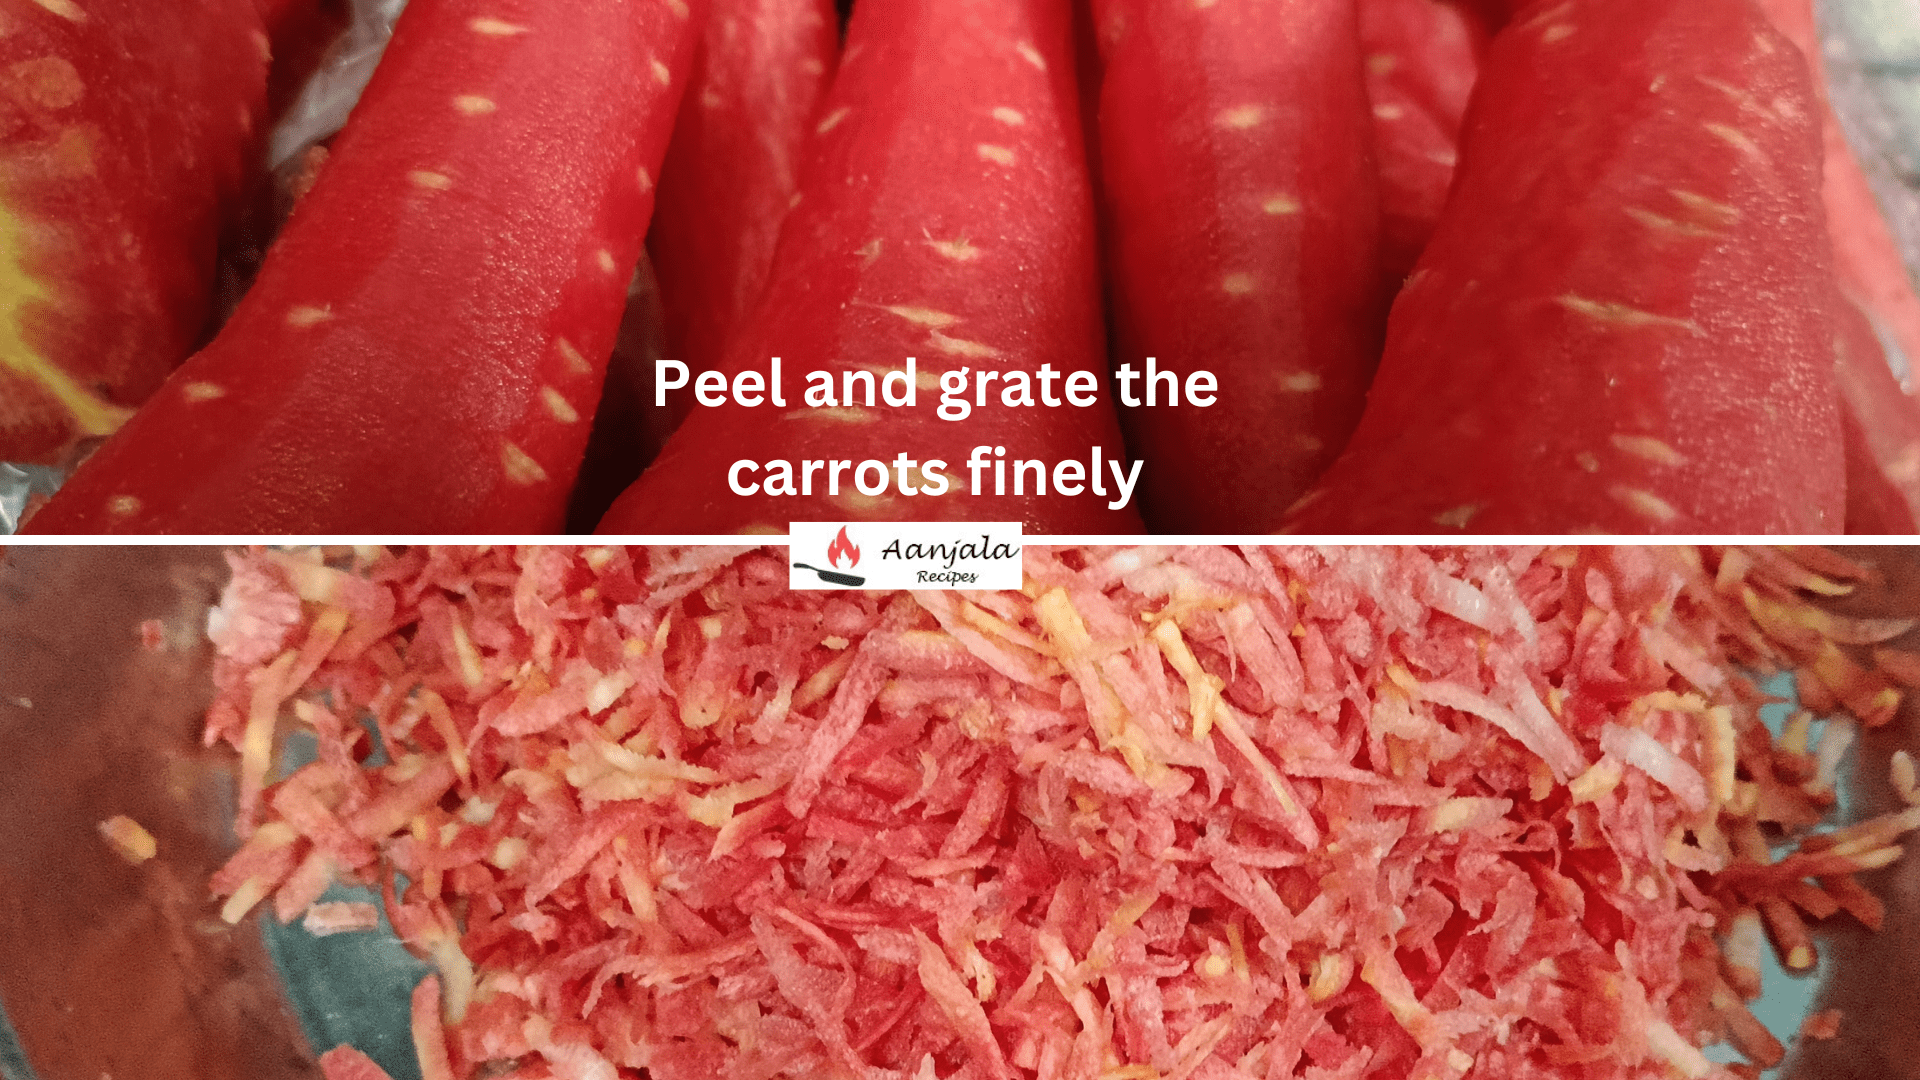 Peel and grate the carrots finely (1)